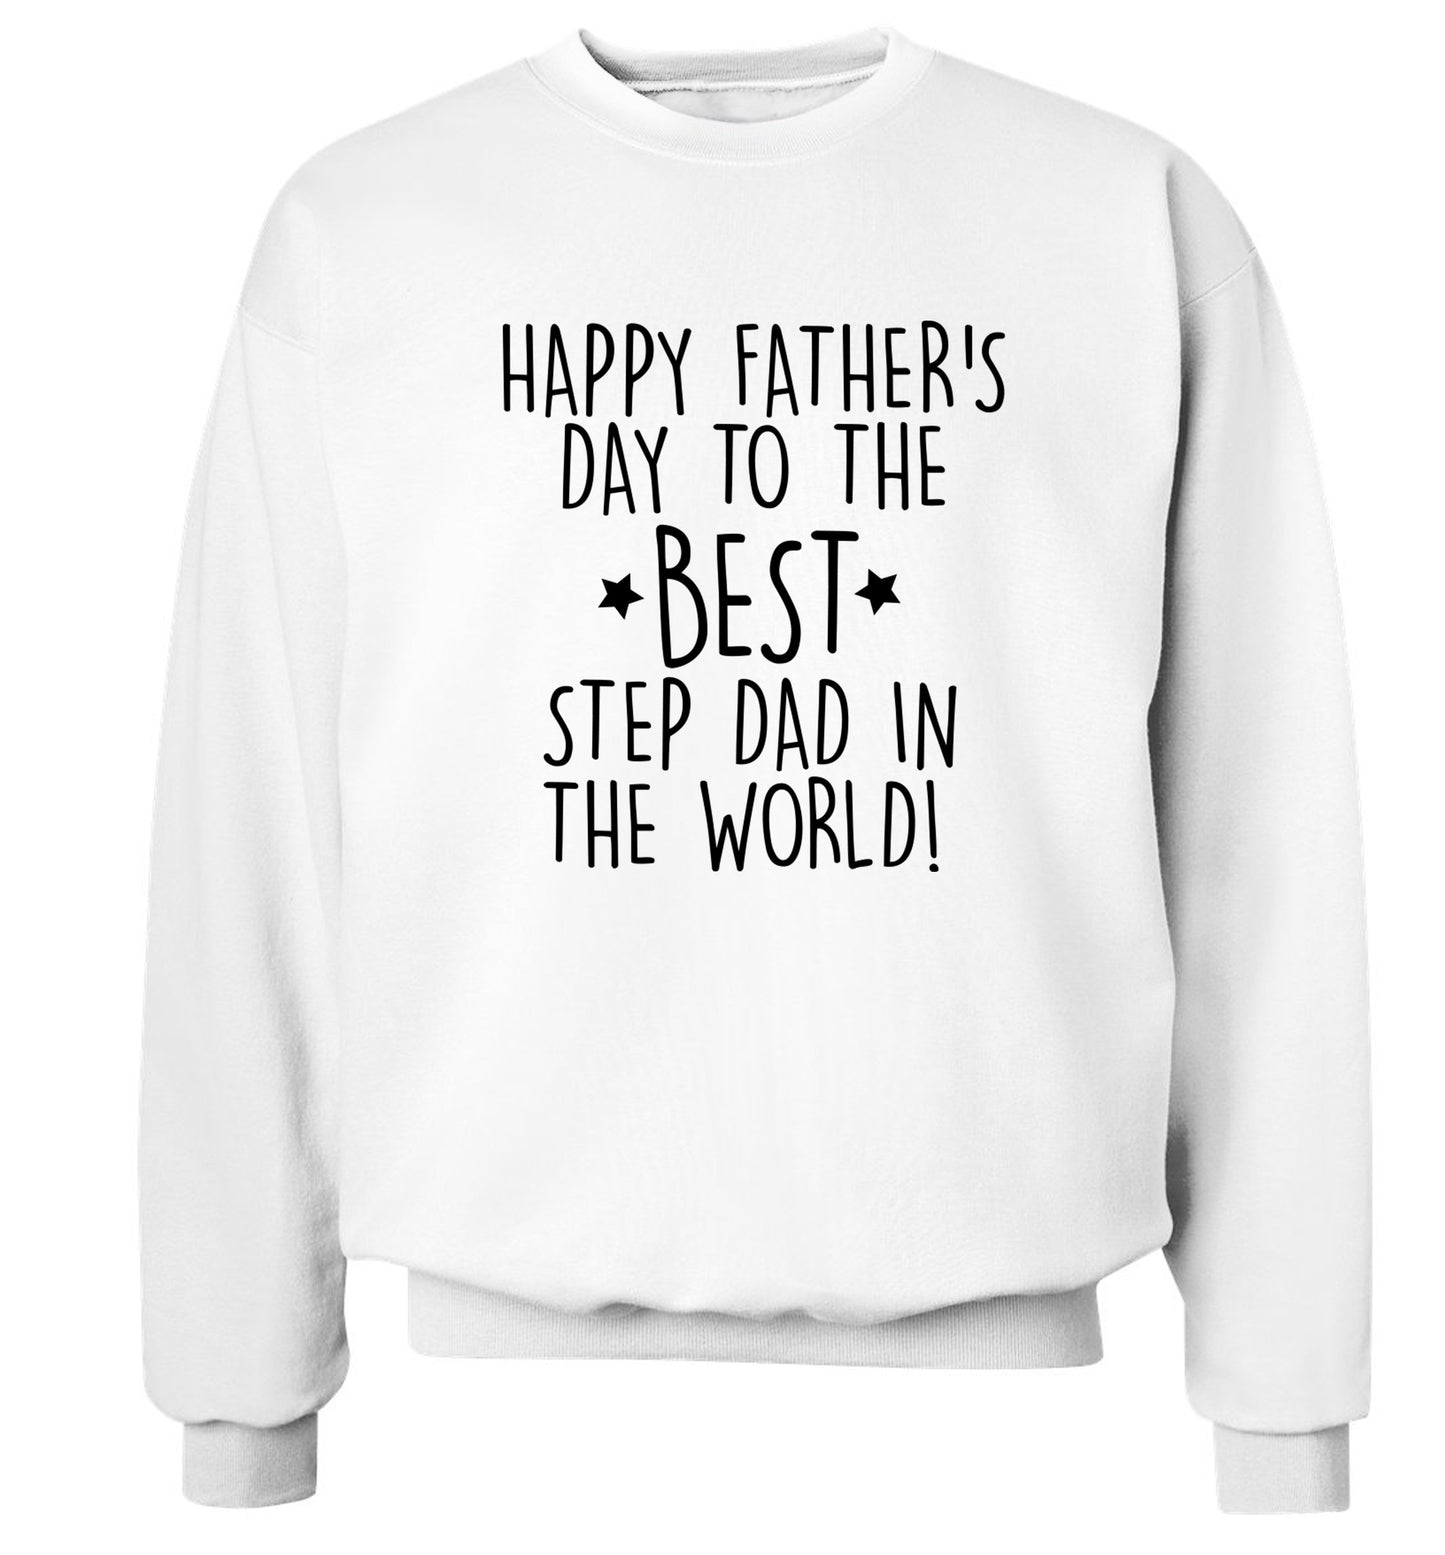 Happy Father's day to the best step dad in the world! Adult's unisex white Sweater 2XL